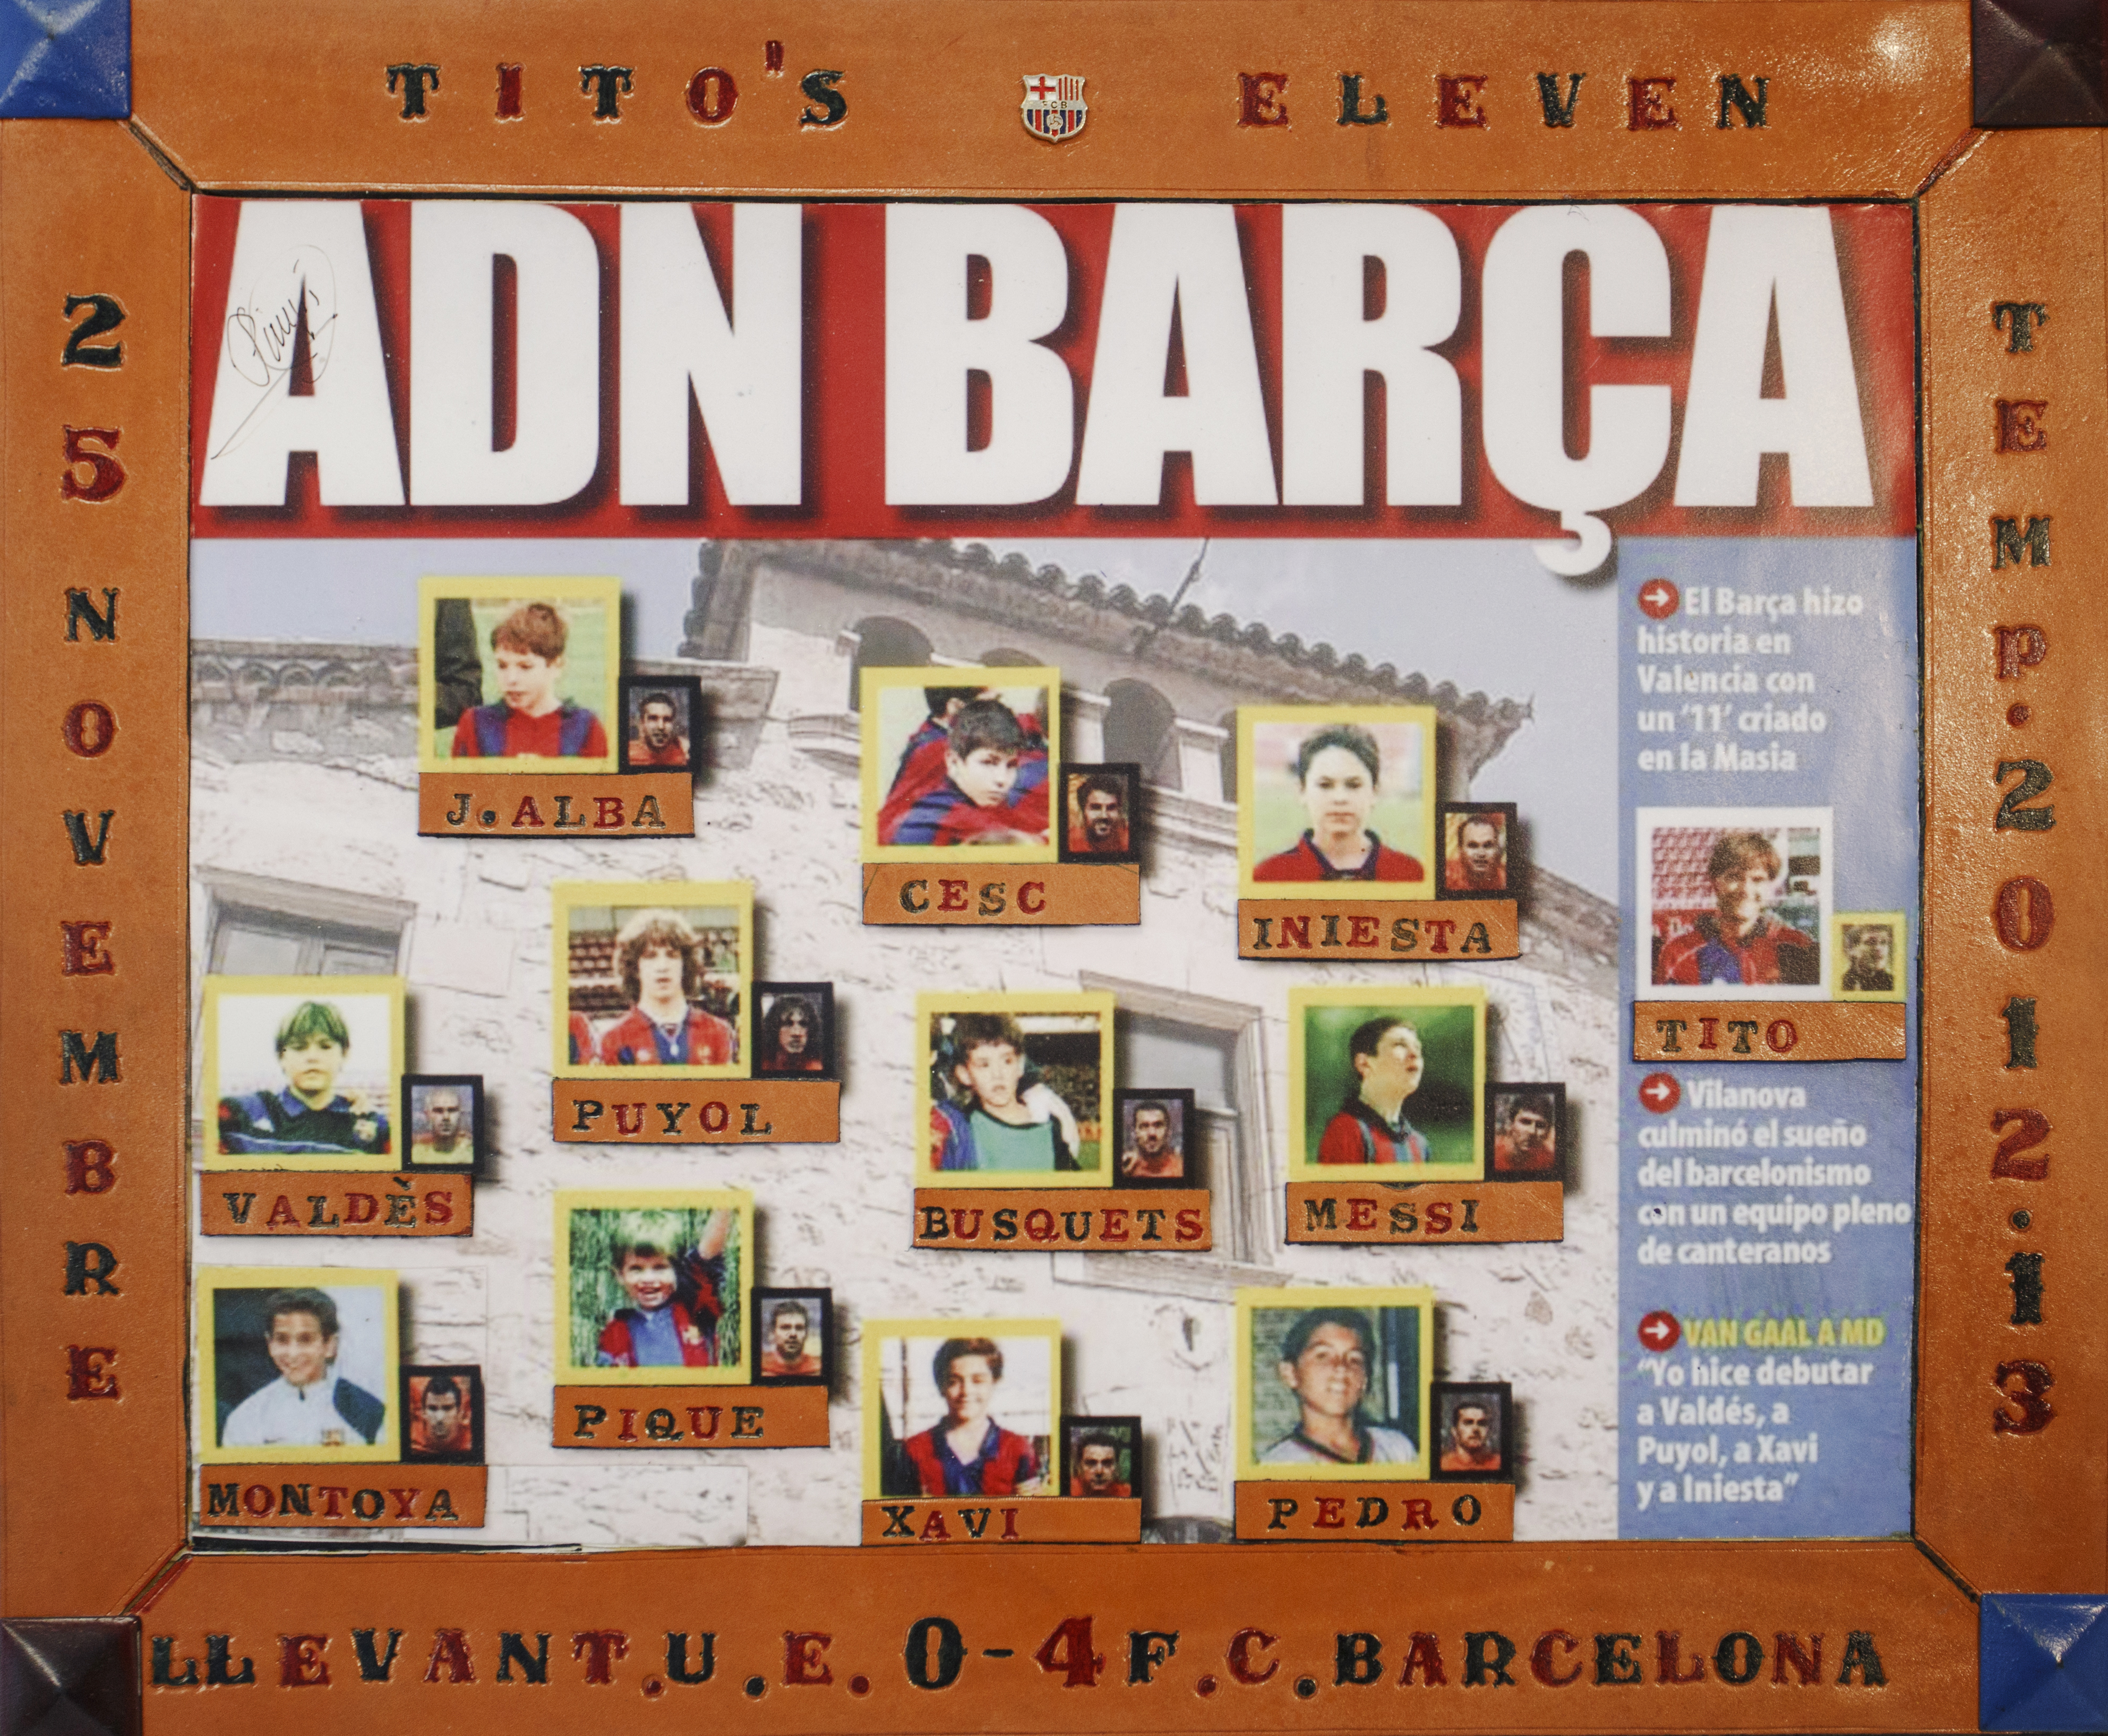 A poster featuring the Barcelona XI, all graduates of the club's La Masia youth academy, from the game against Levante in November 2012.